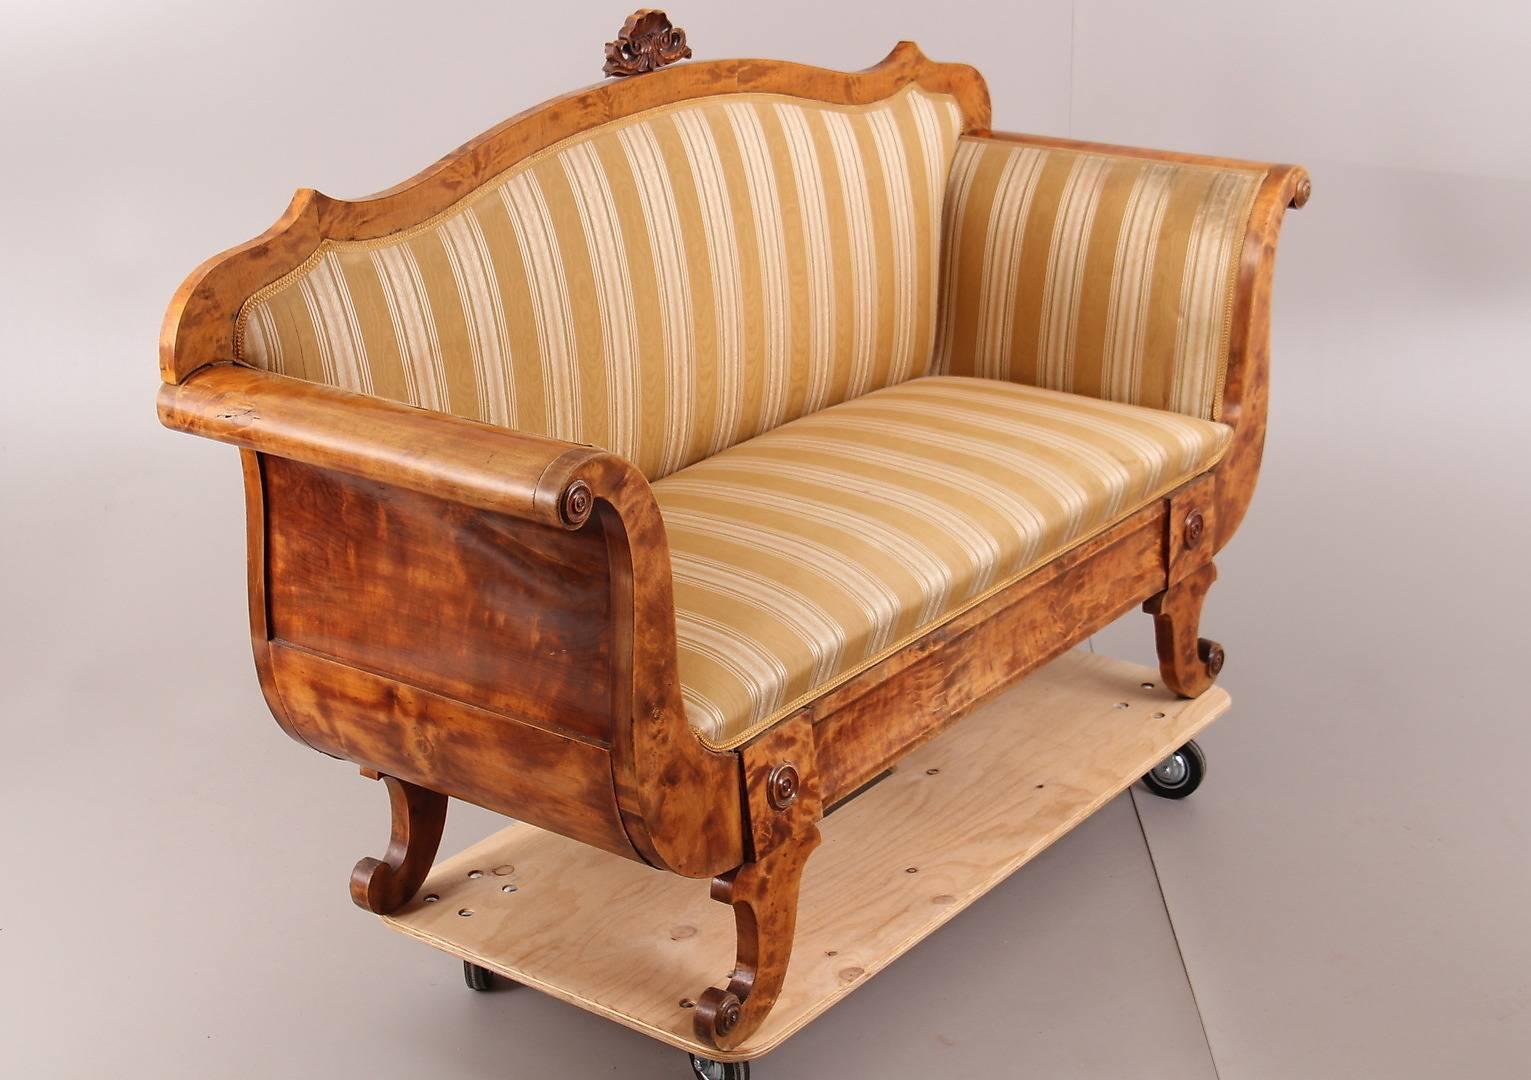 Antique Swedish Biedermeier empire smaller sofa with a highly carved shape and stunning shell motif on the top.

There are smaller carved details above the gracefully curved legs and roundels on the end of the swooping arms.

The sofa features the